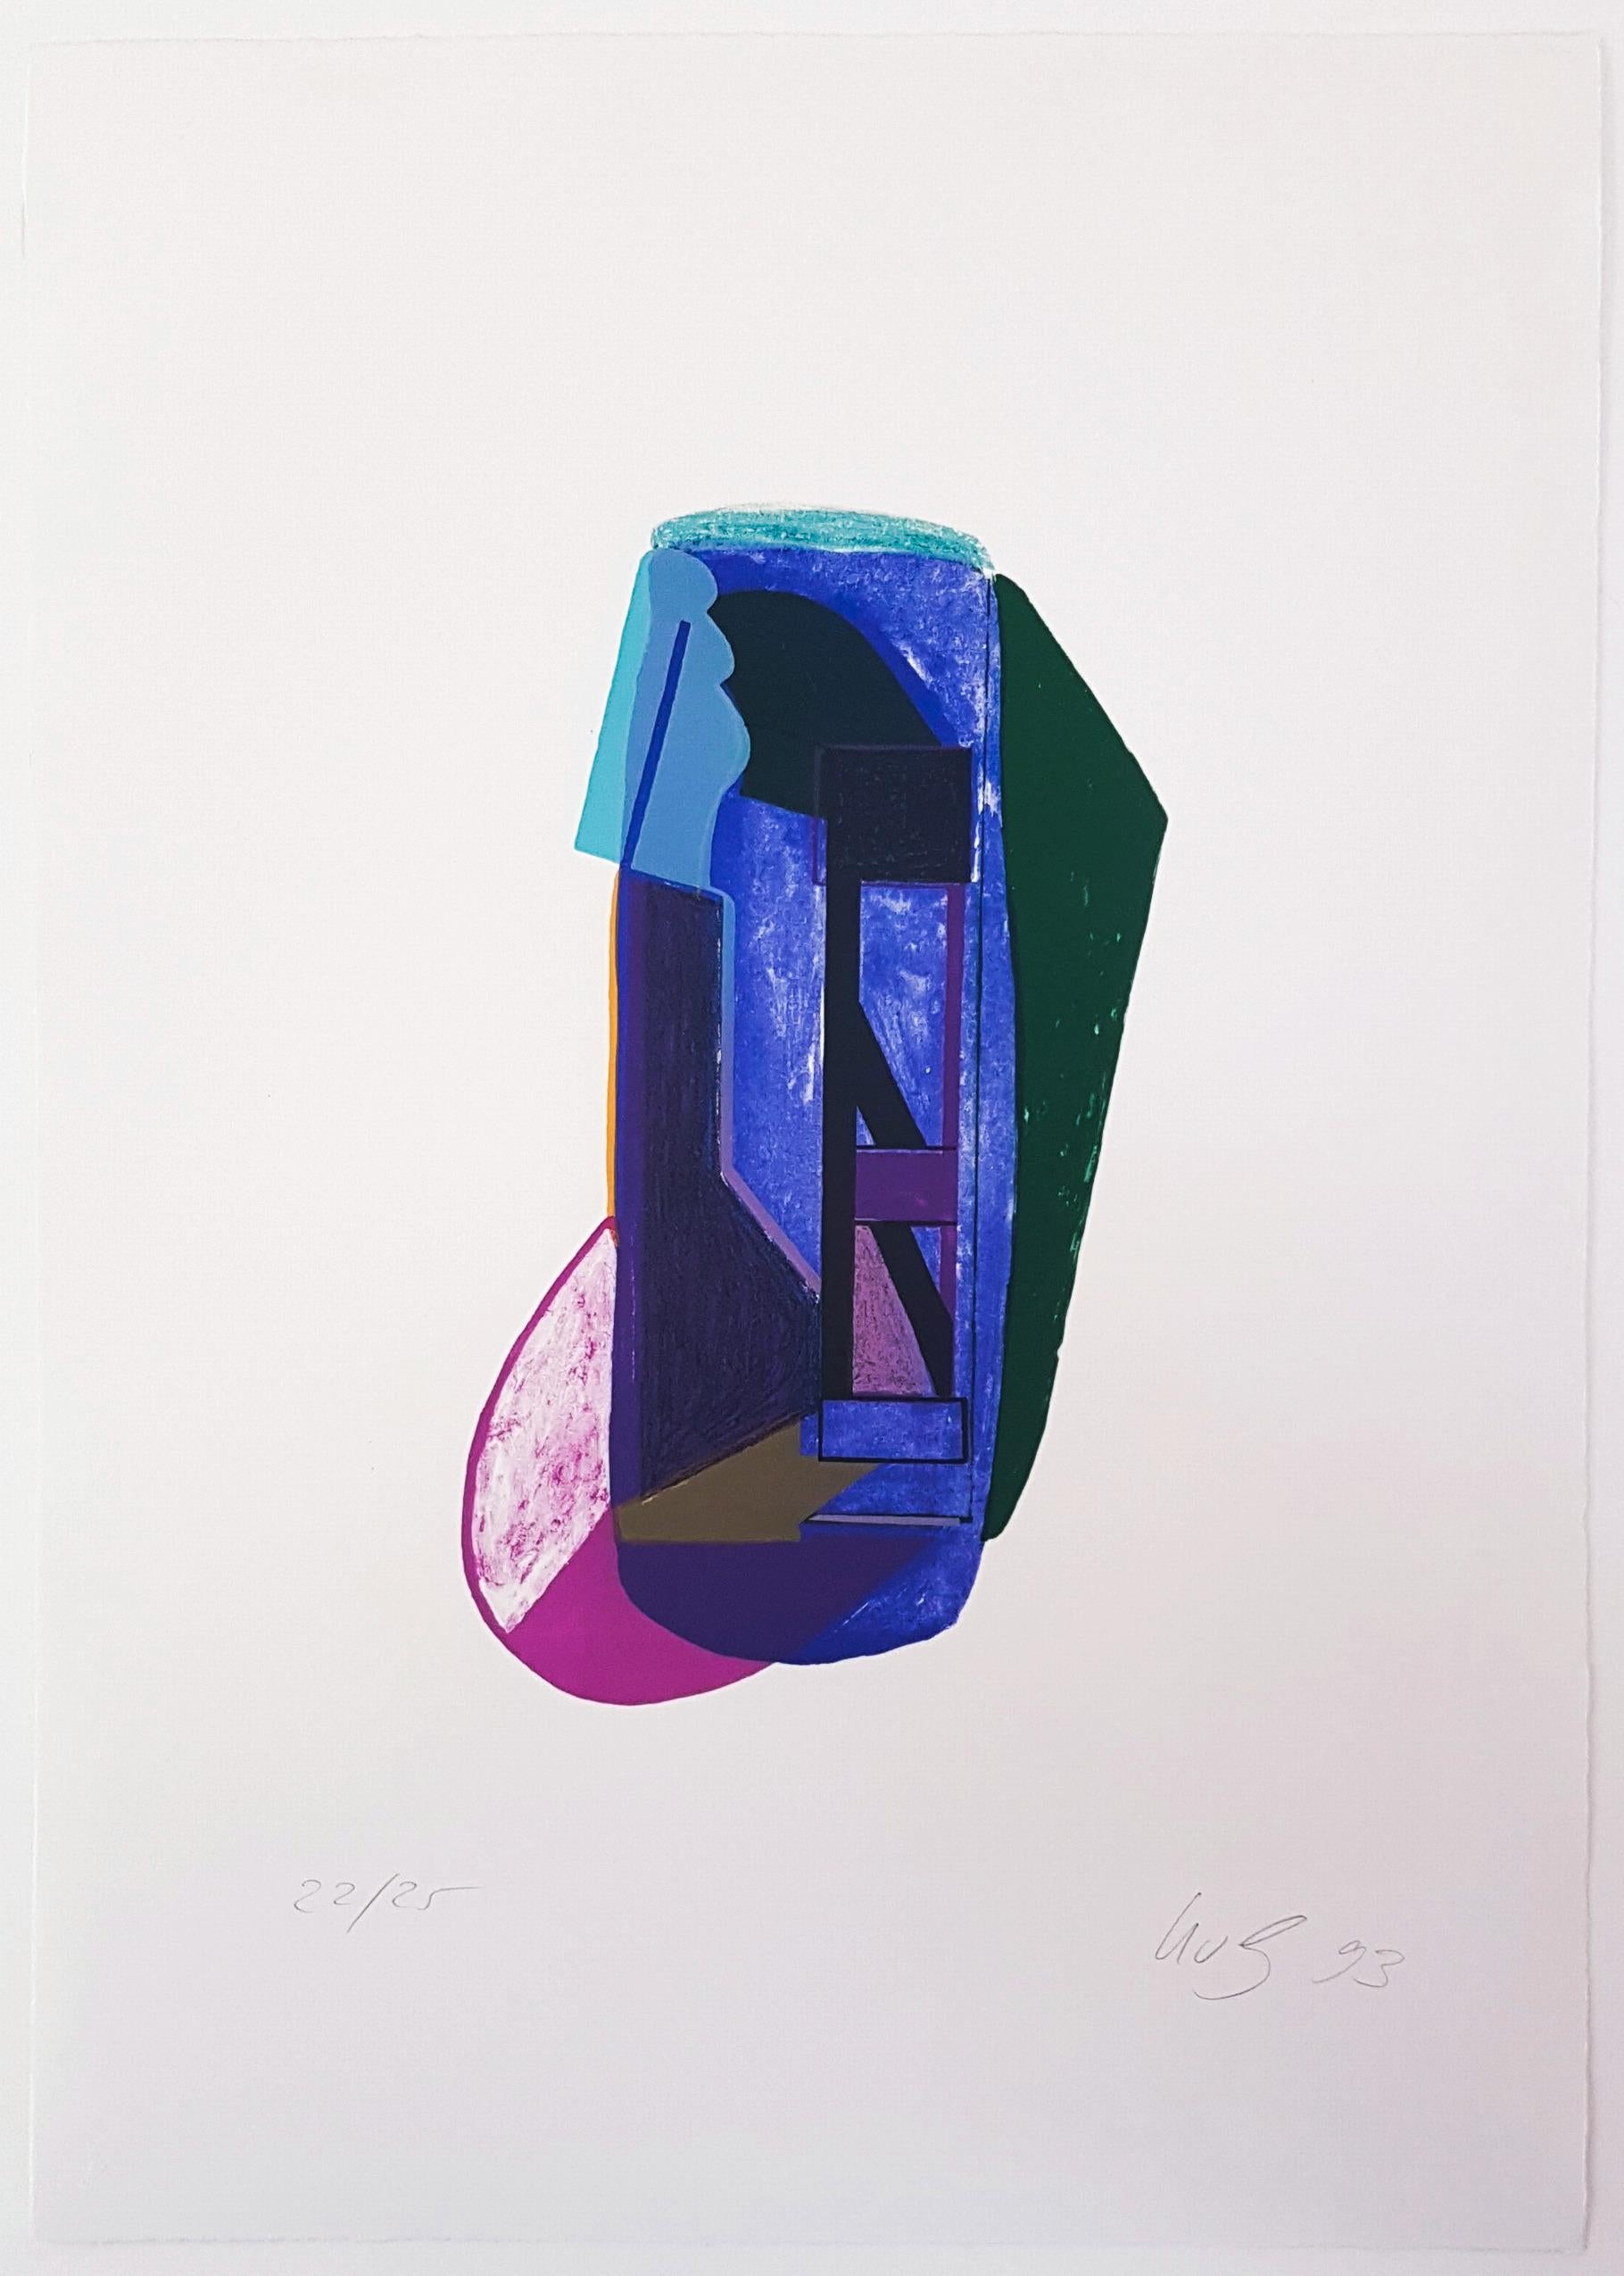 Ursula von Gierke Abstract Print - Untitled (Abstract, ~34% OFF + $10 OFF SHIPPING - LIMITED TIME ONLY)